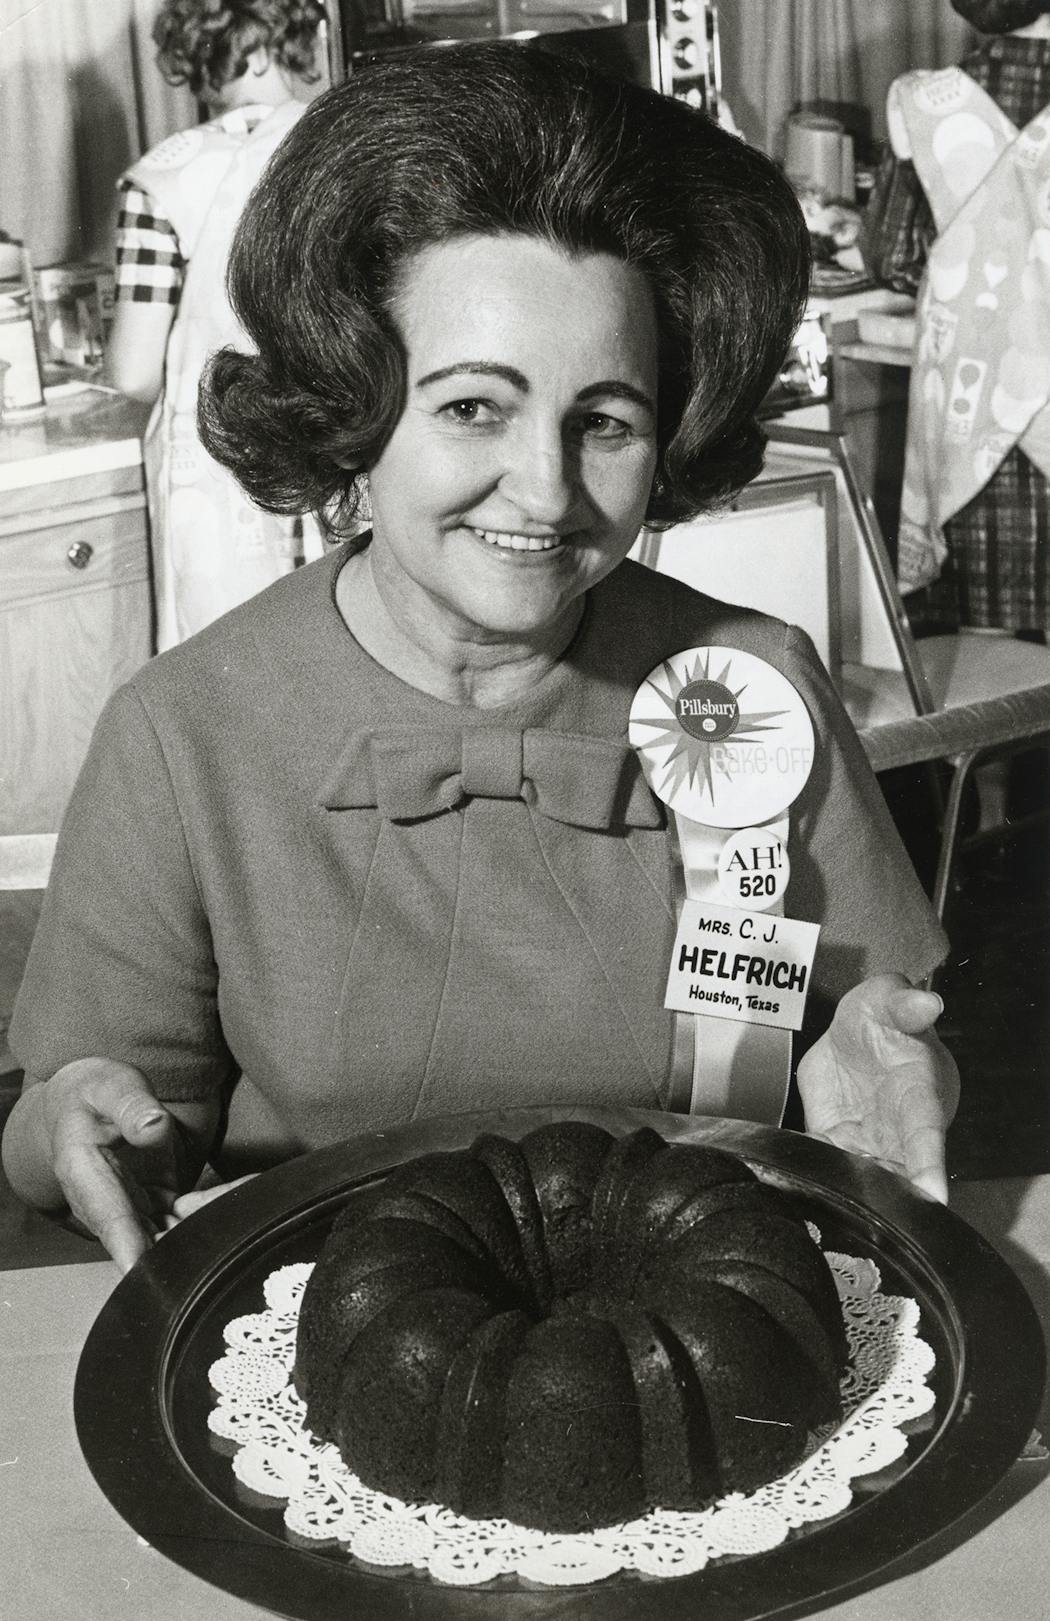 Ella Helfrich took second place in the 1966 Pillsbury Bake-Off for her Tunnel of Fudge recipe, launching the Bundt pan into home kitchens across the country.